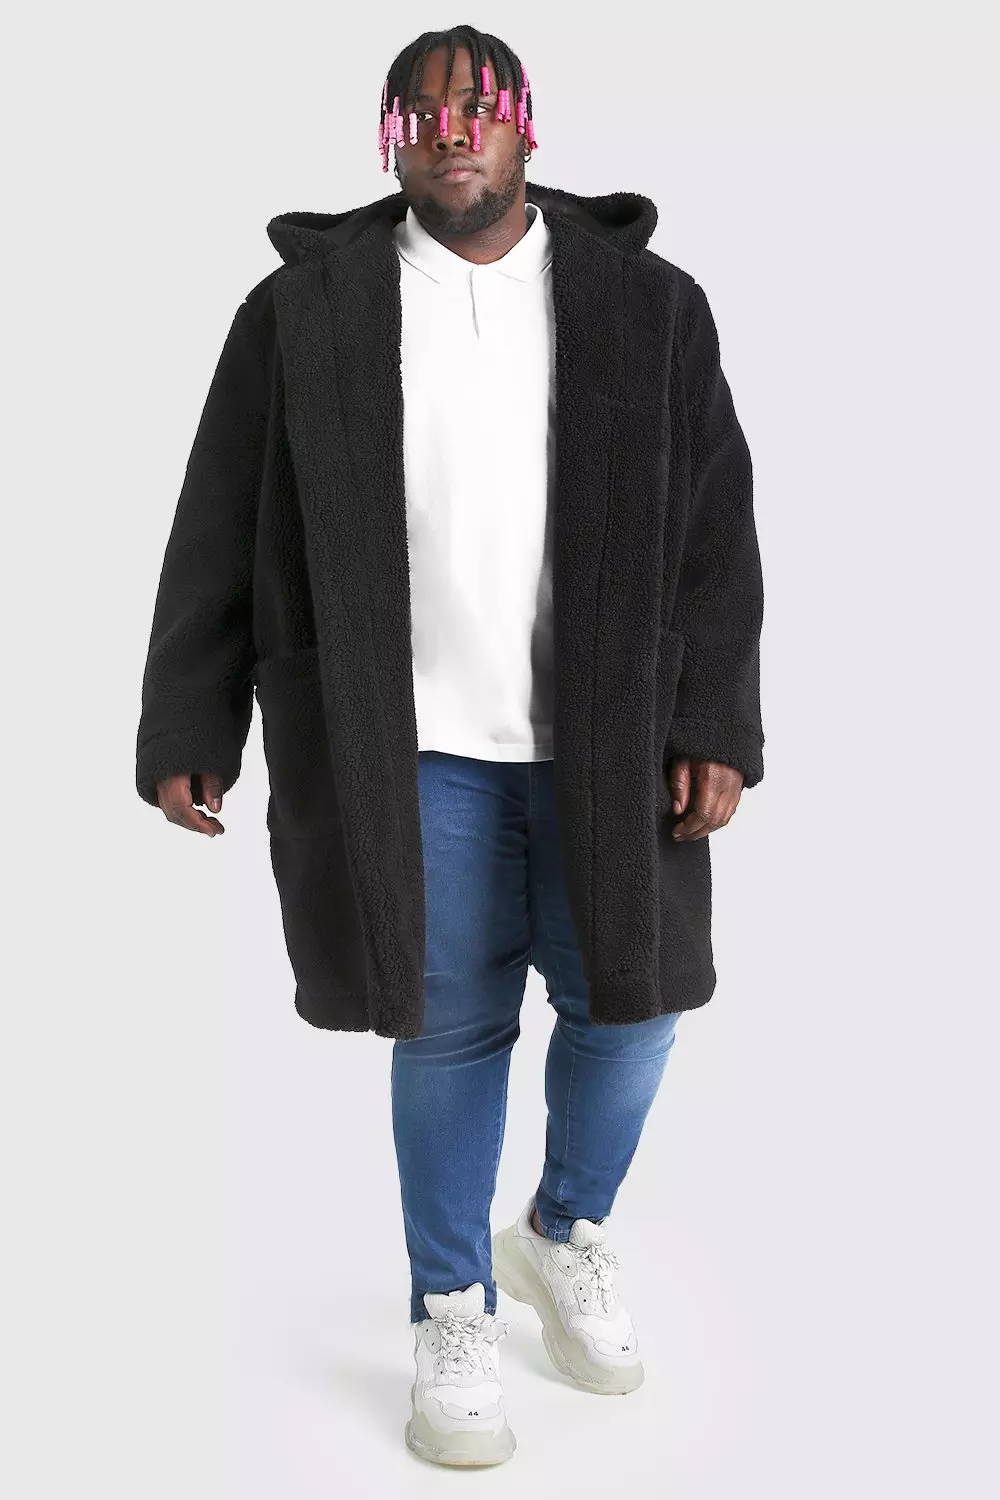 At understrege Savvy Ansøger Plus Size Borg Hooded Duffle Coat | boohooMAN USA